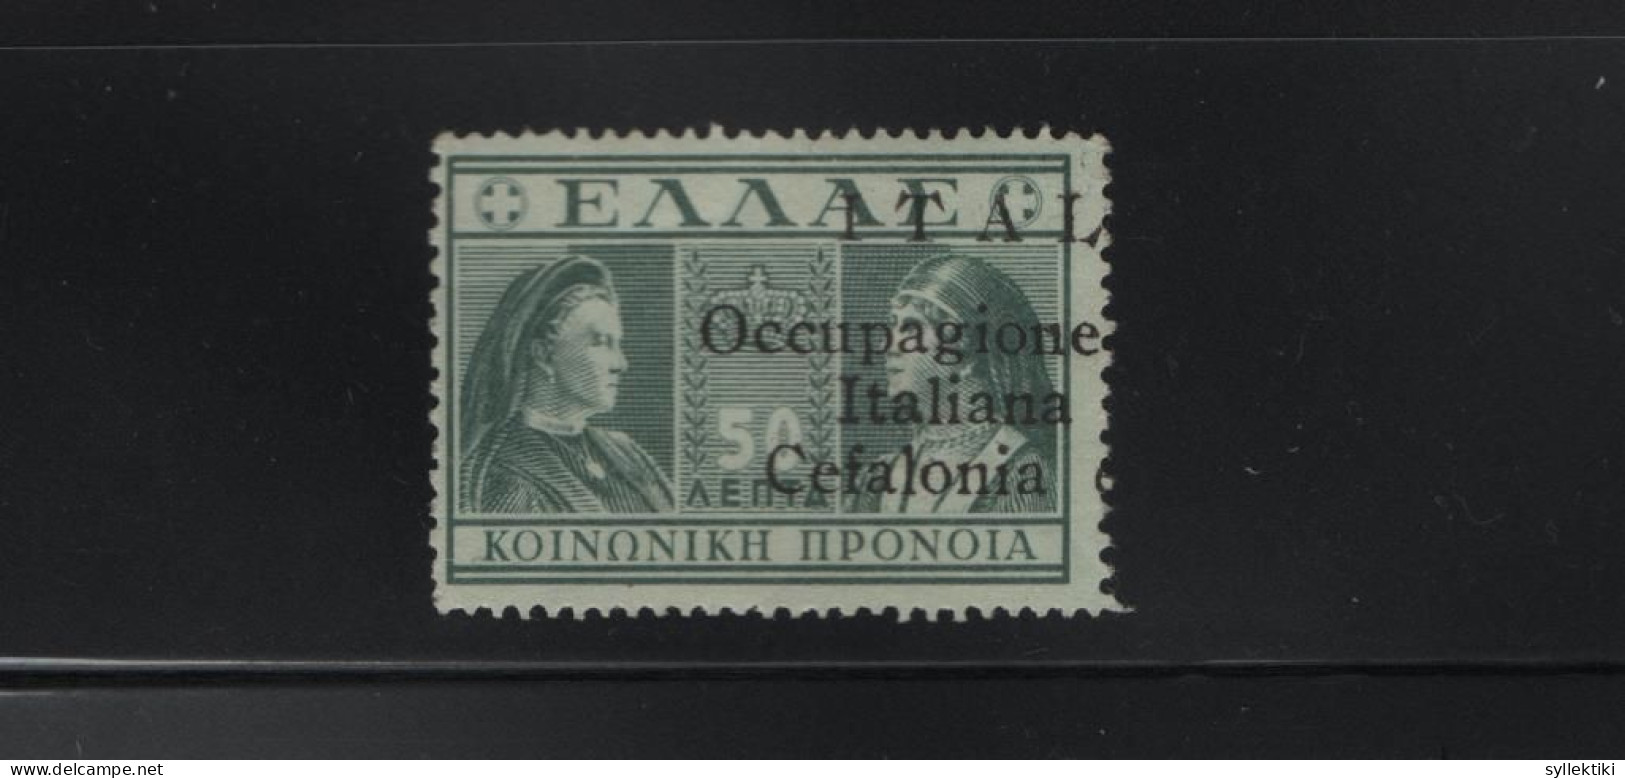 GREECE IONIAN ISLANDS 1941 50 LEPTA CHARITY ISSUE (QUEENS) SINGLE  MNH STAMP OVERPRINTED ITALIA Occupazione Militare Ita - Ionian Islands